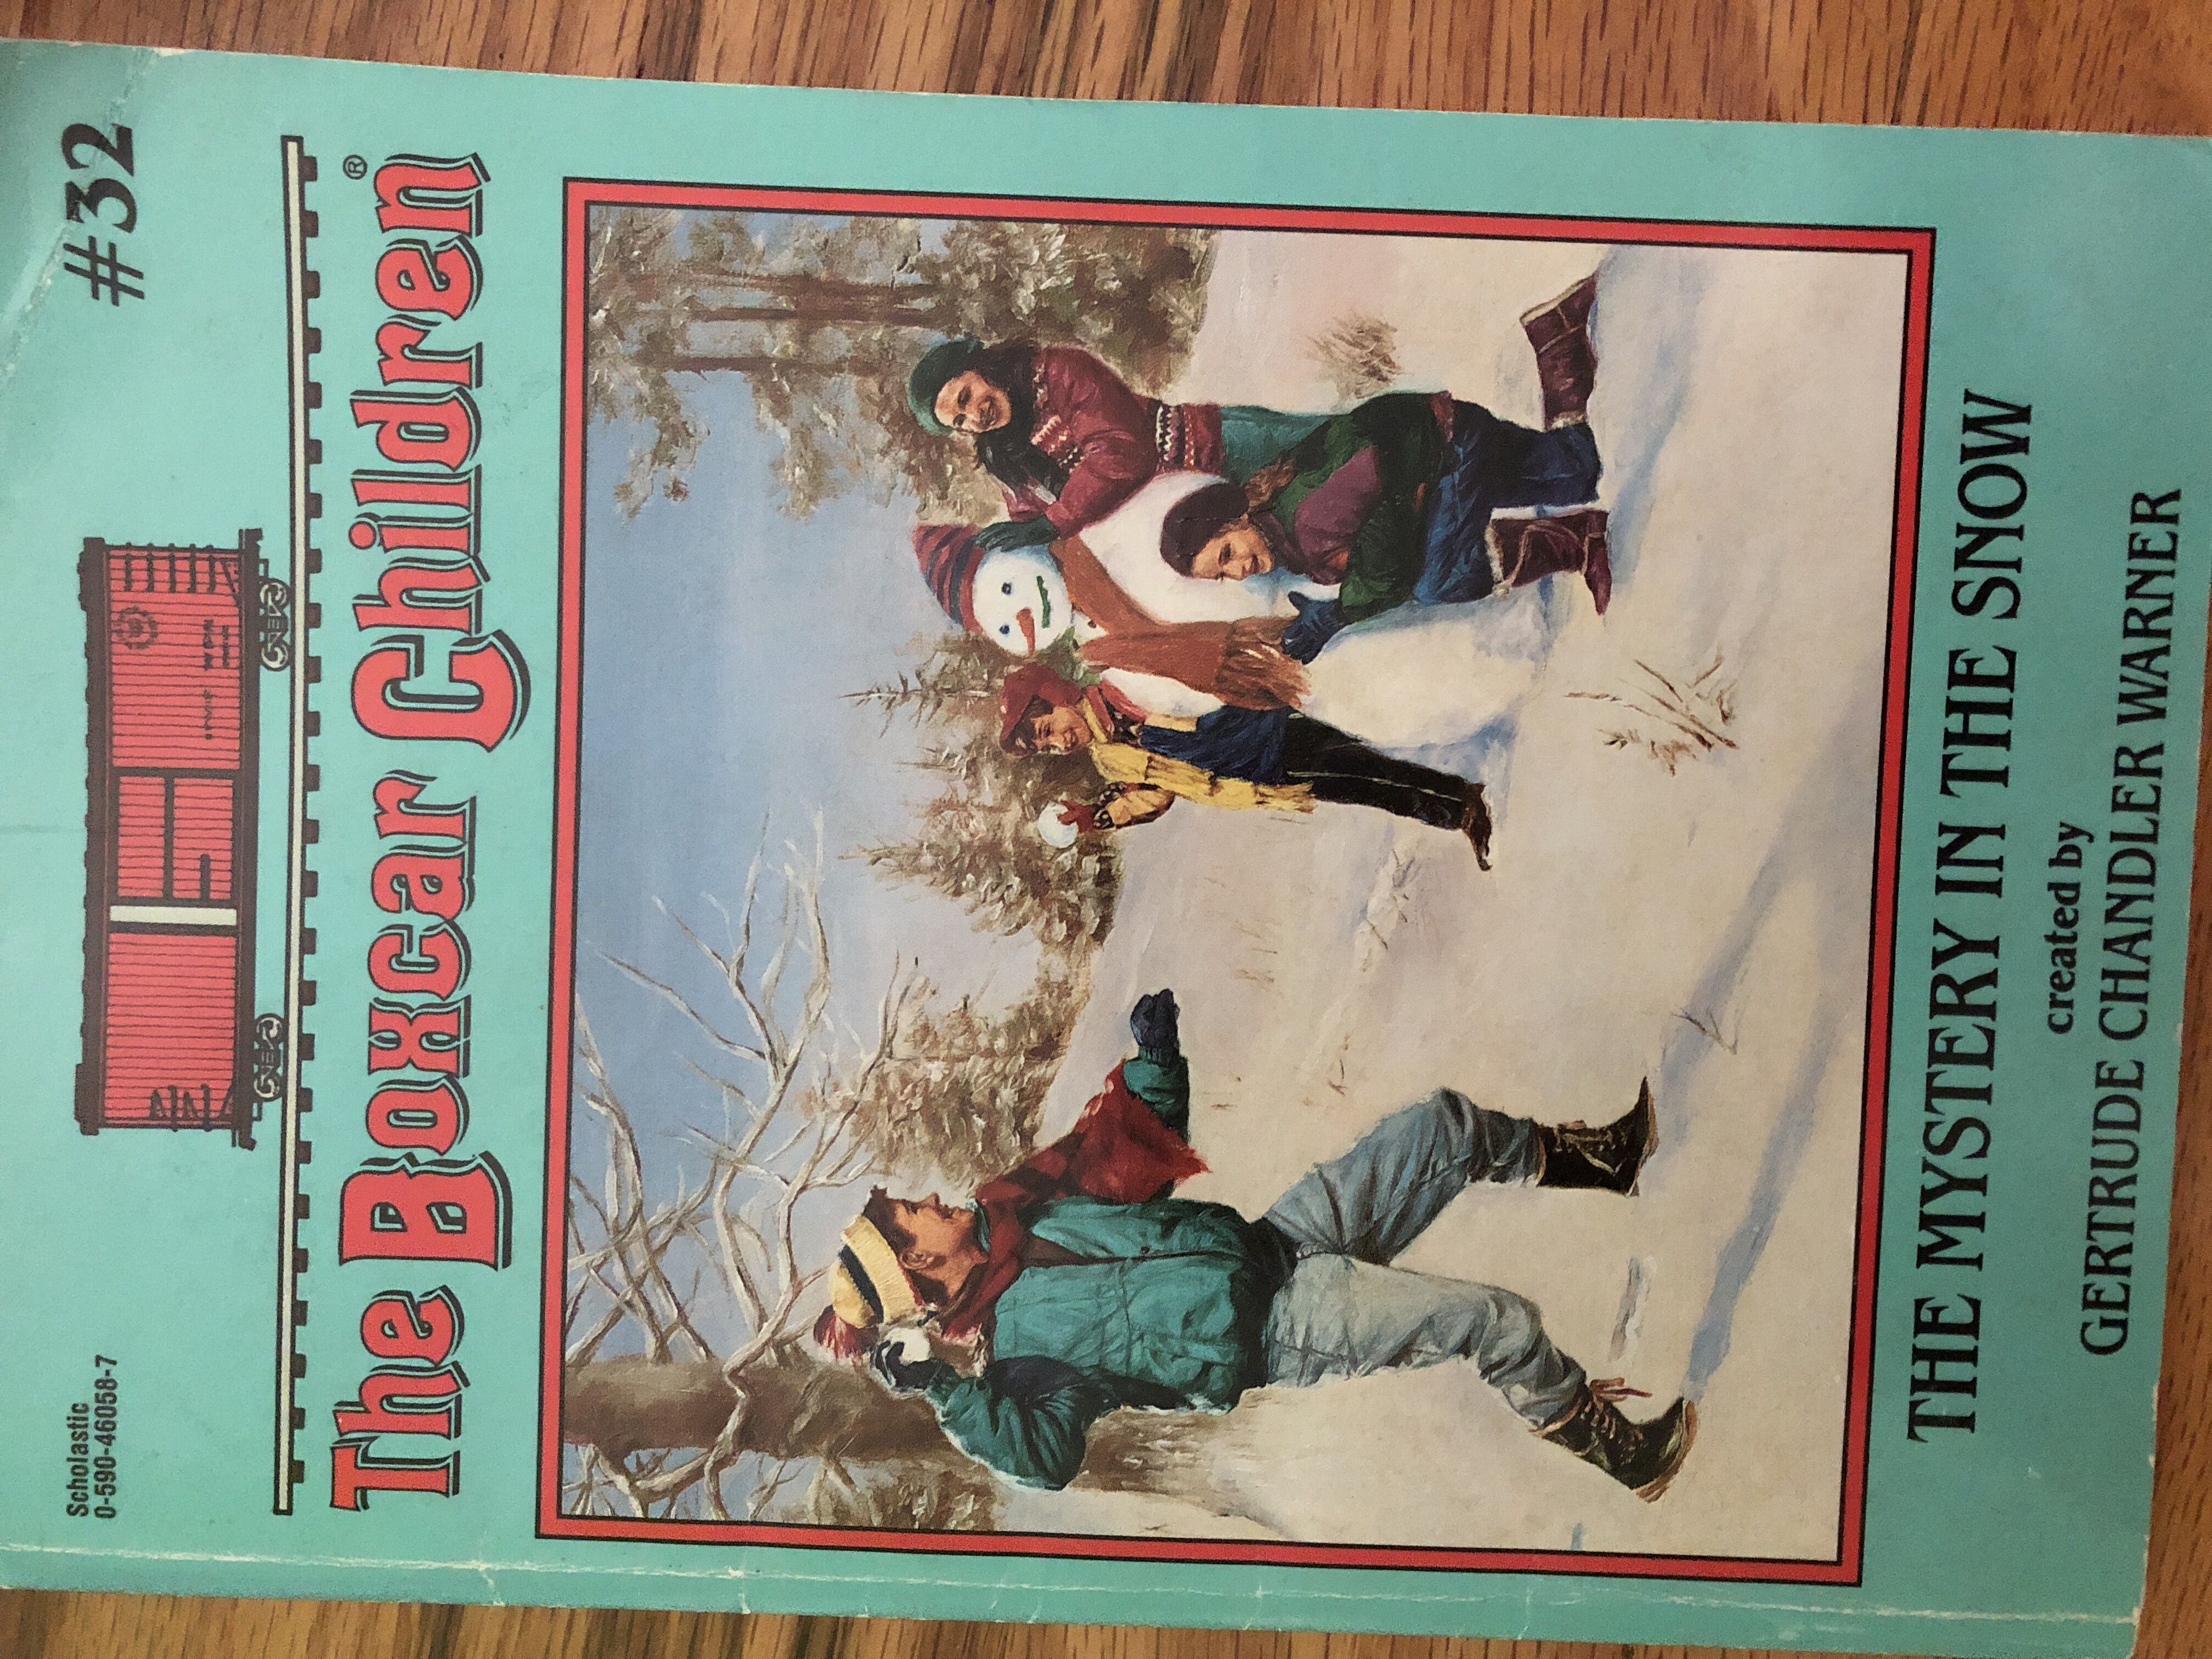 The Boxcar Children #32: The Mystery In The Snow - Gertrude Chandler Warner (Scholastic Inc - Paperback) book collectible [Barcode 0590460587] - Main Image 1